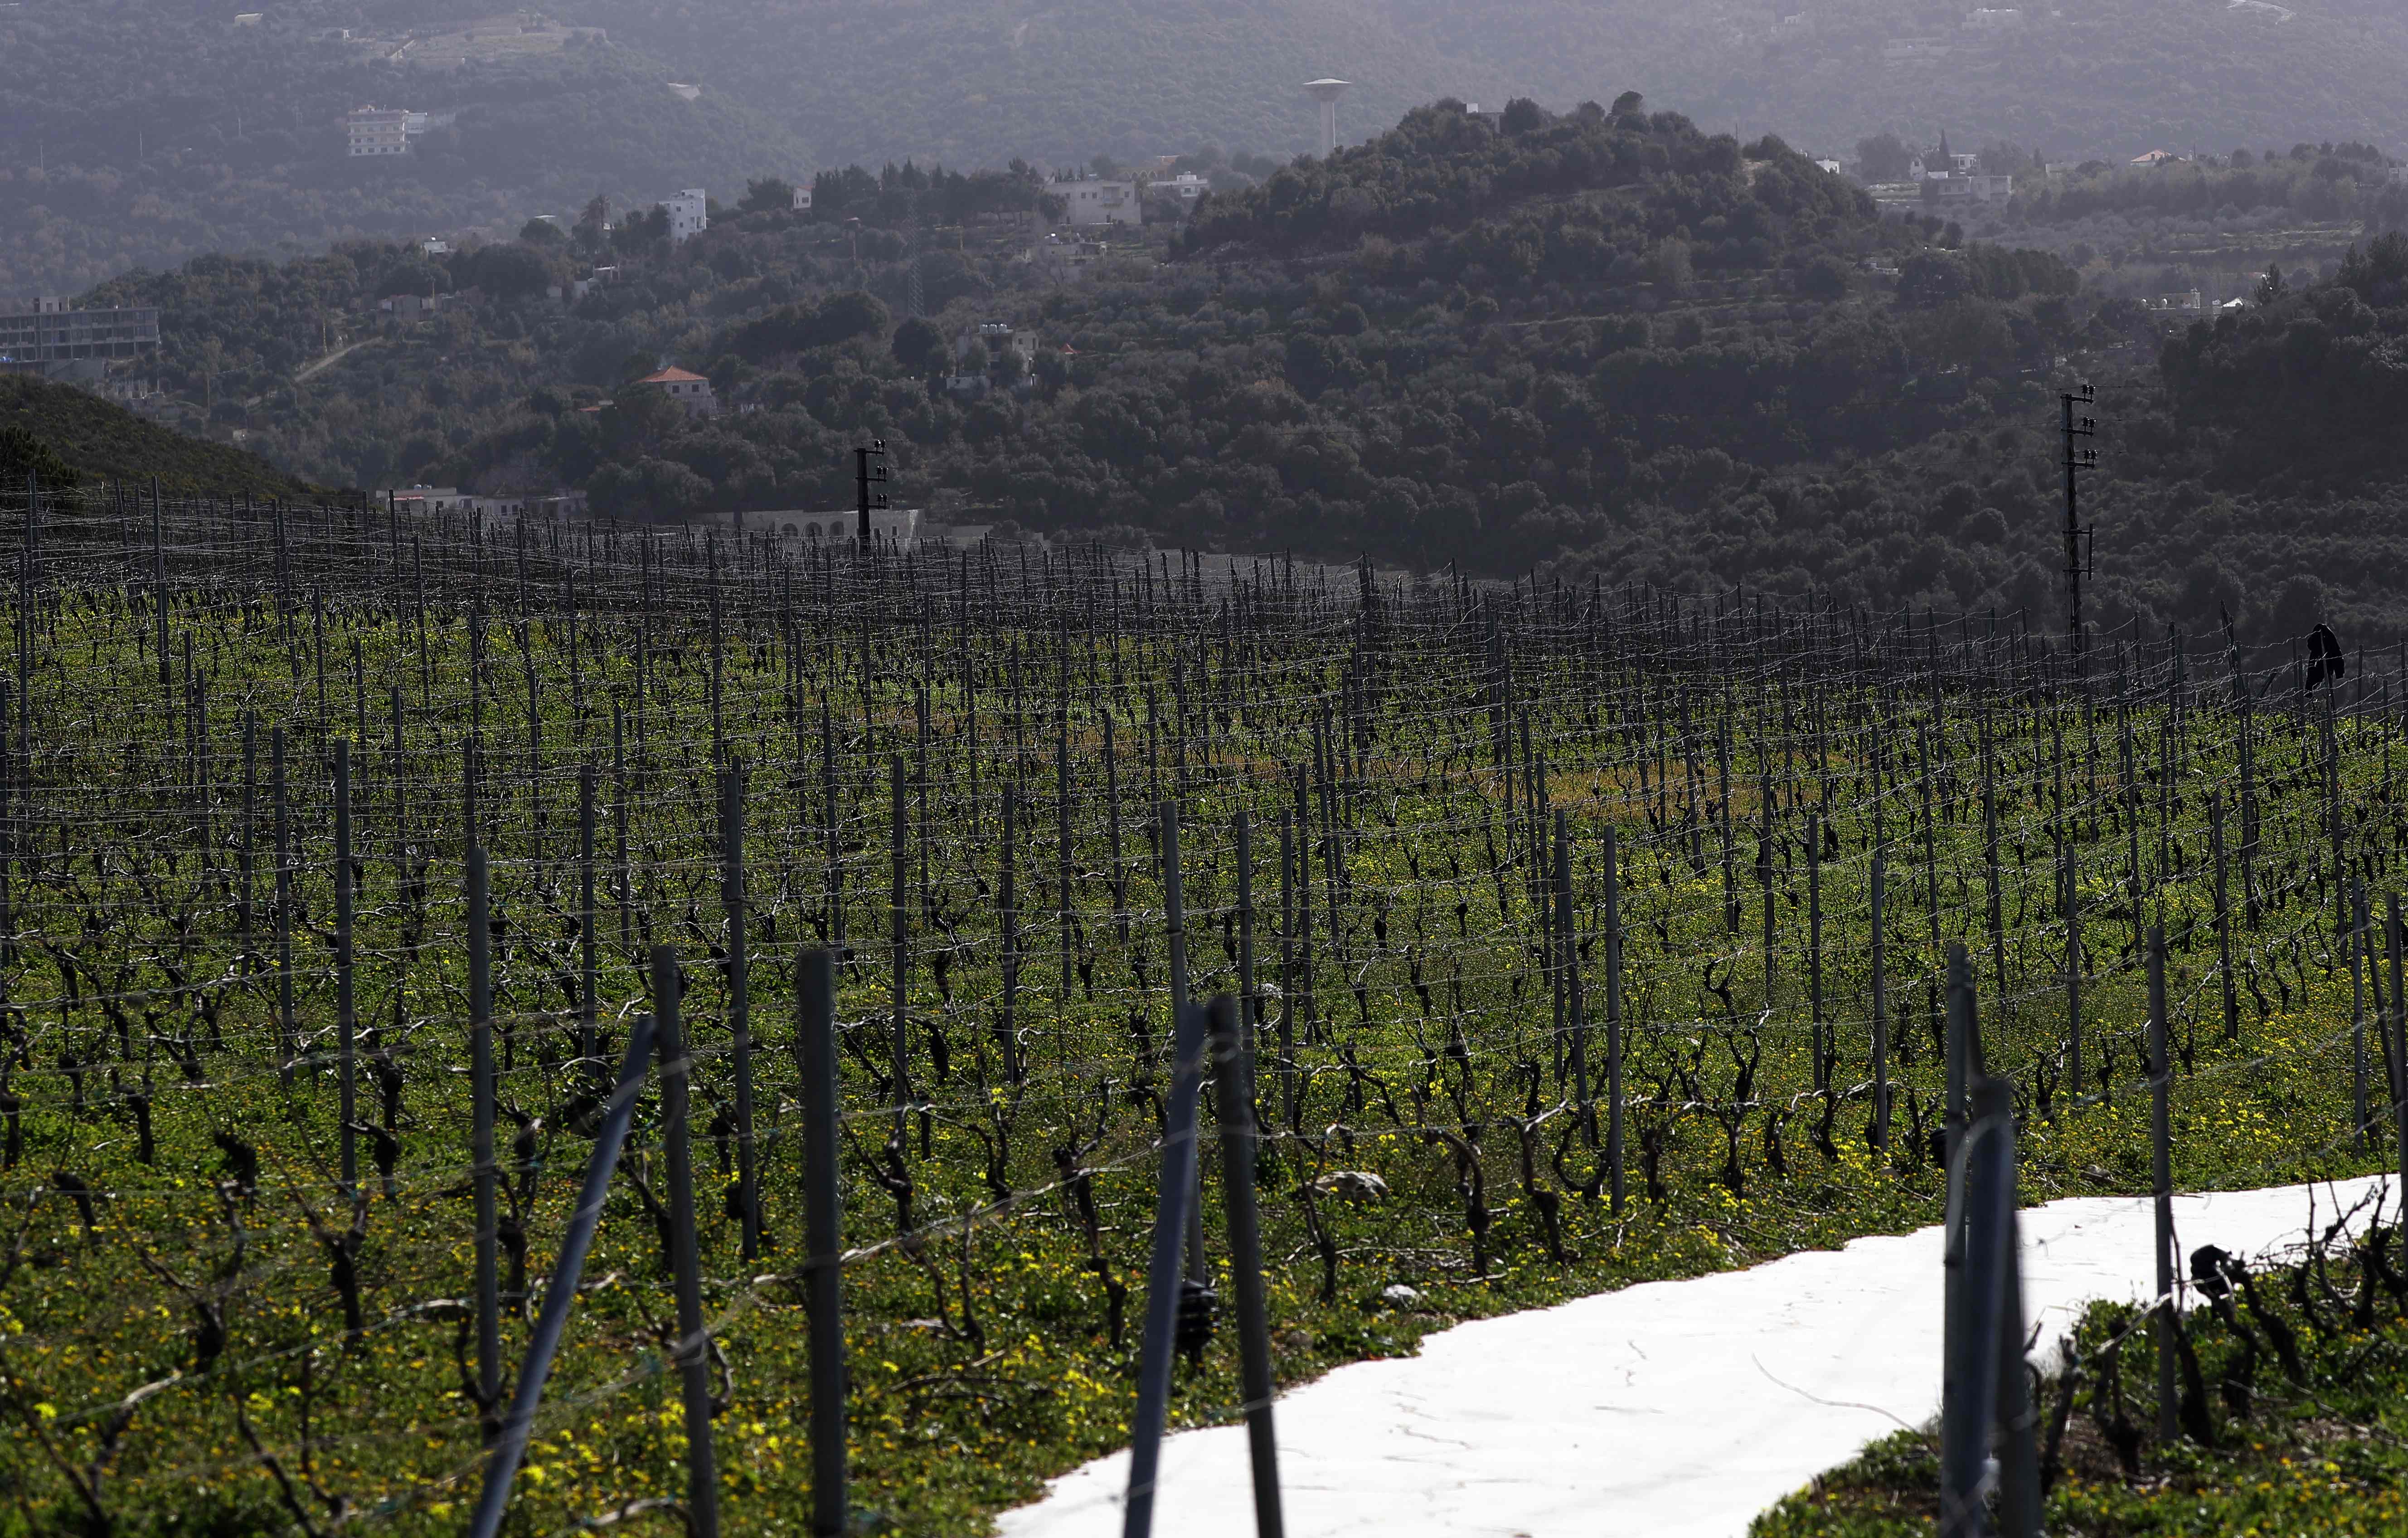 A general view shows the vine terraces of Lebanon's Ixsir winery, co-founded by the detained businessman of Lebanese origin Carlos Ghosn, in an agricultural region above the coastal town of Batroun, north of the Lebanese capital Beirut, on January 25, 2019.